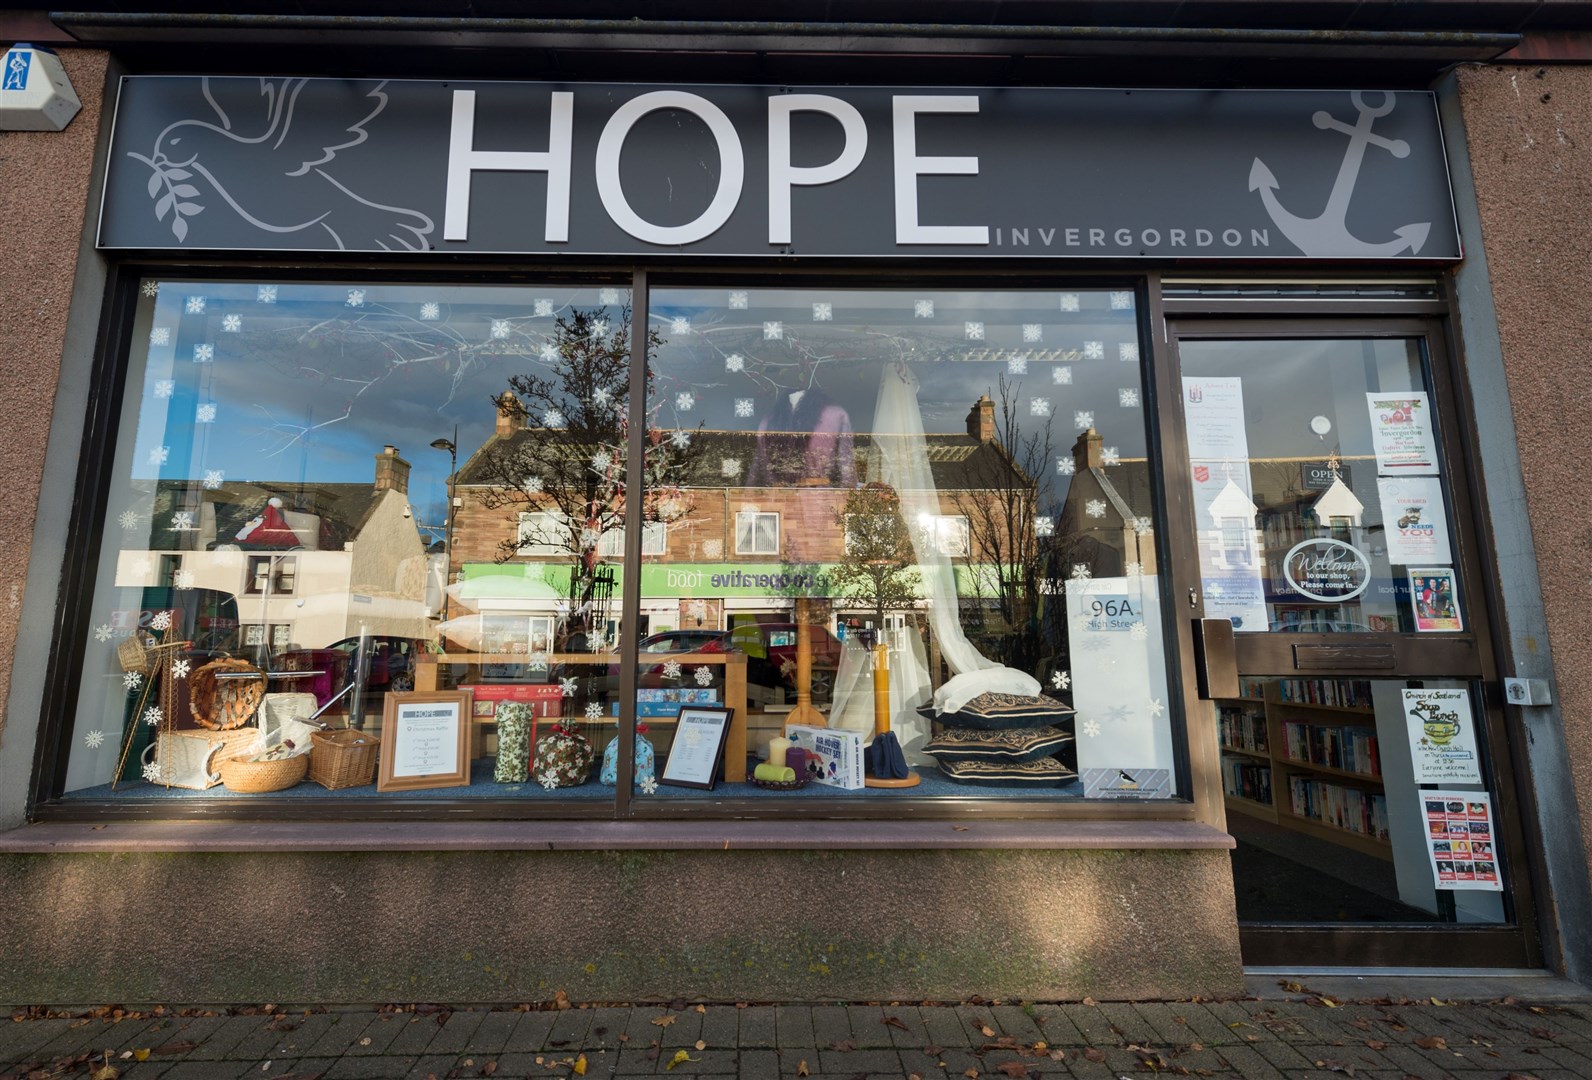 Hope Invergordon is a charity shop which raises money for local groups.